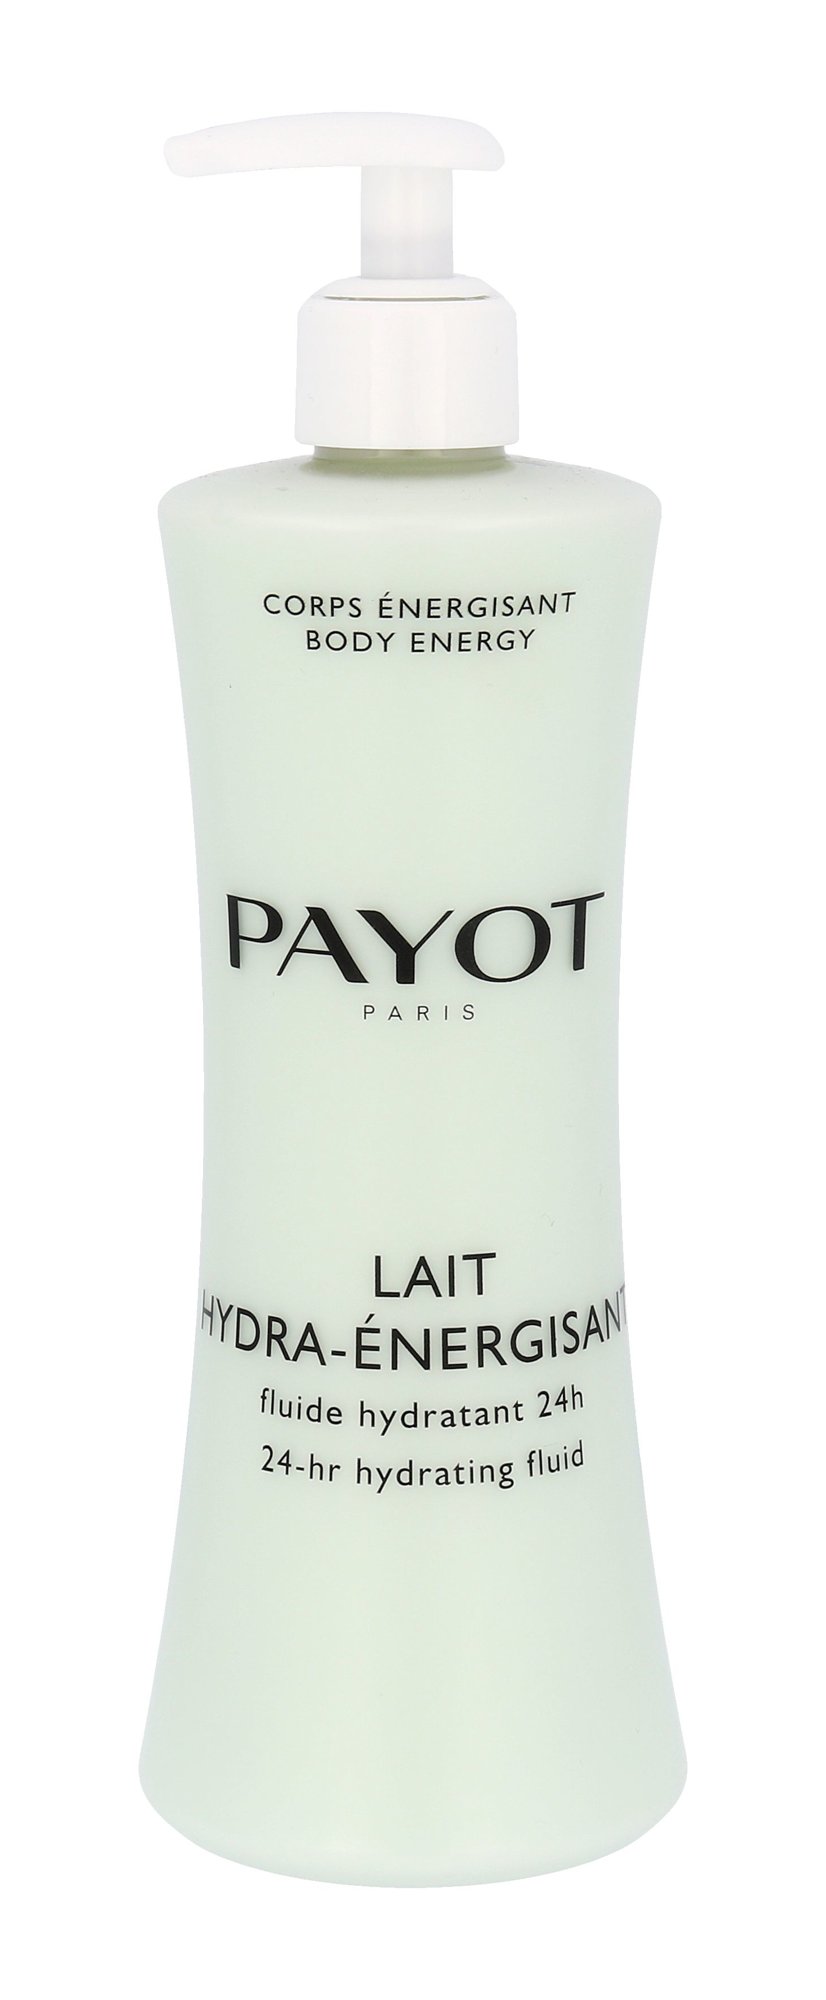 PAYOT Corps Energisant